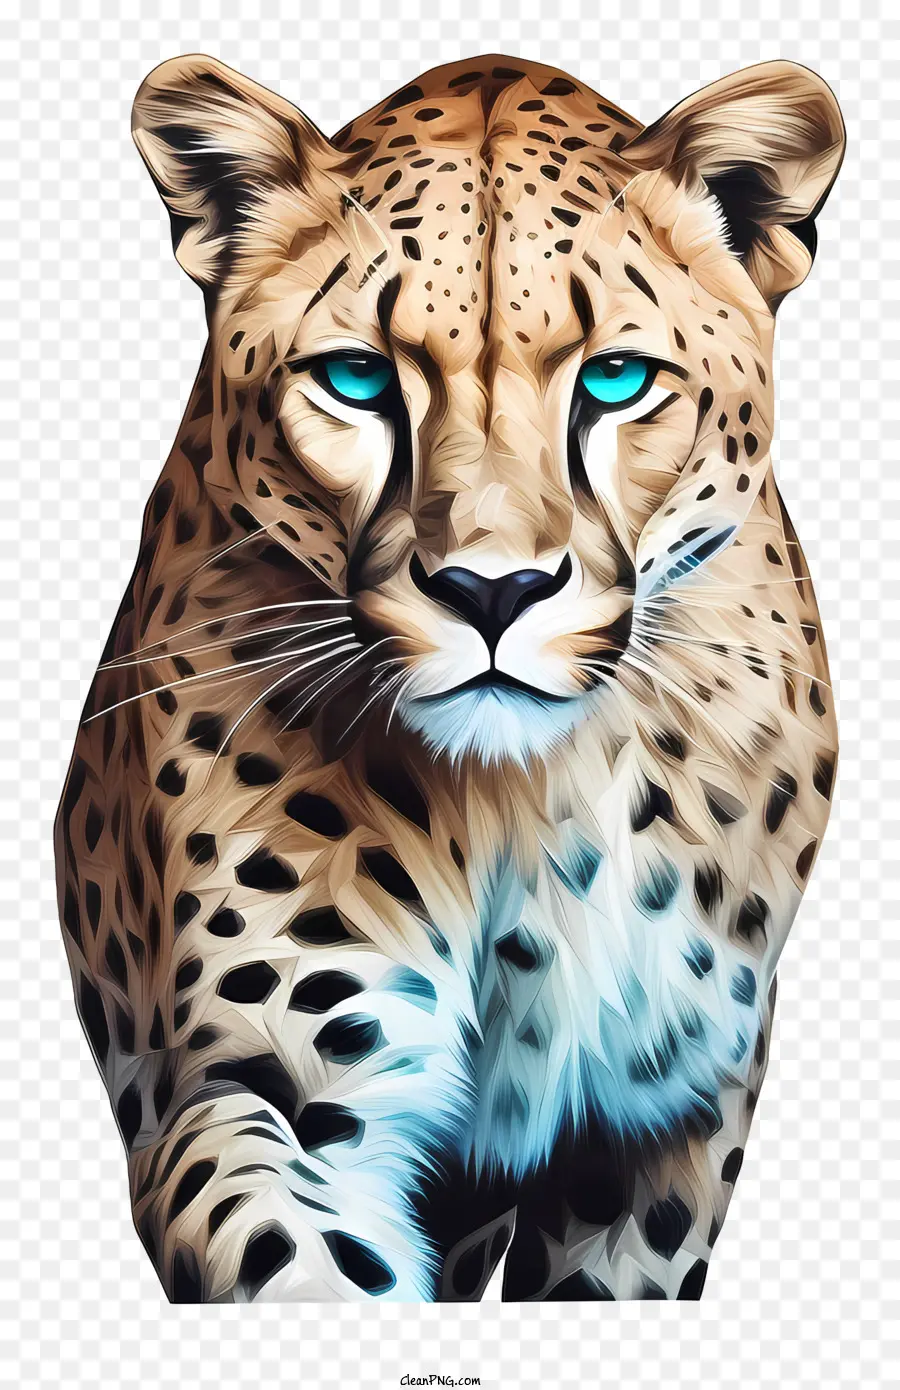 leopard blue eyes hind legs spotted fur mouth open